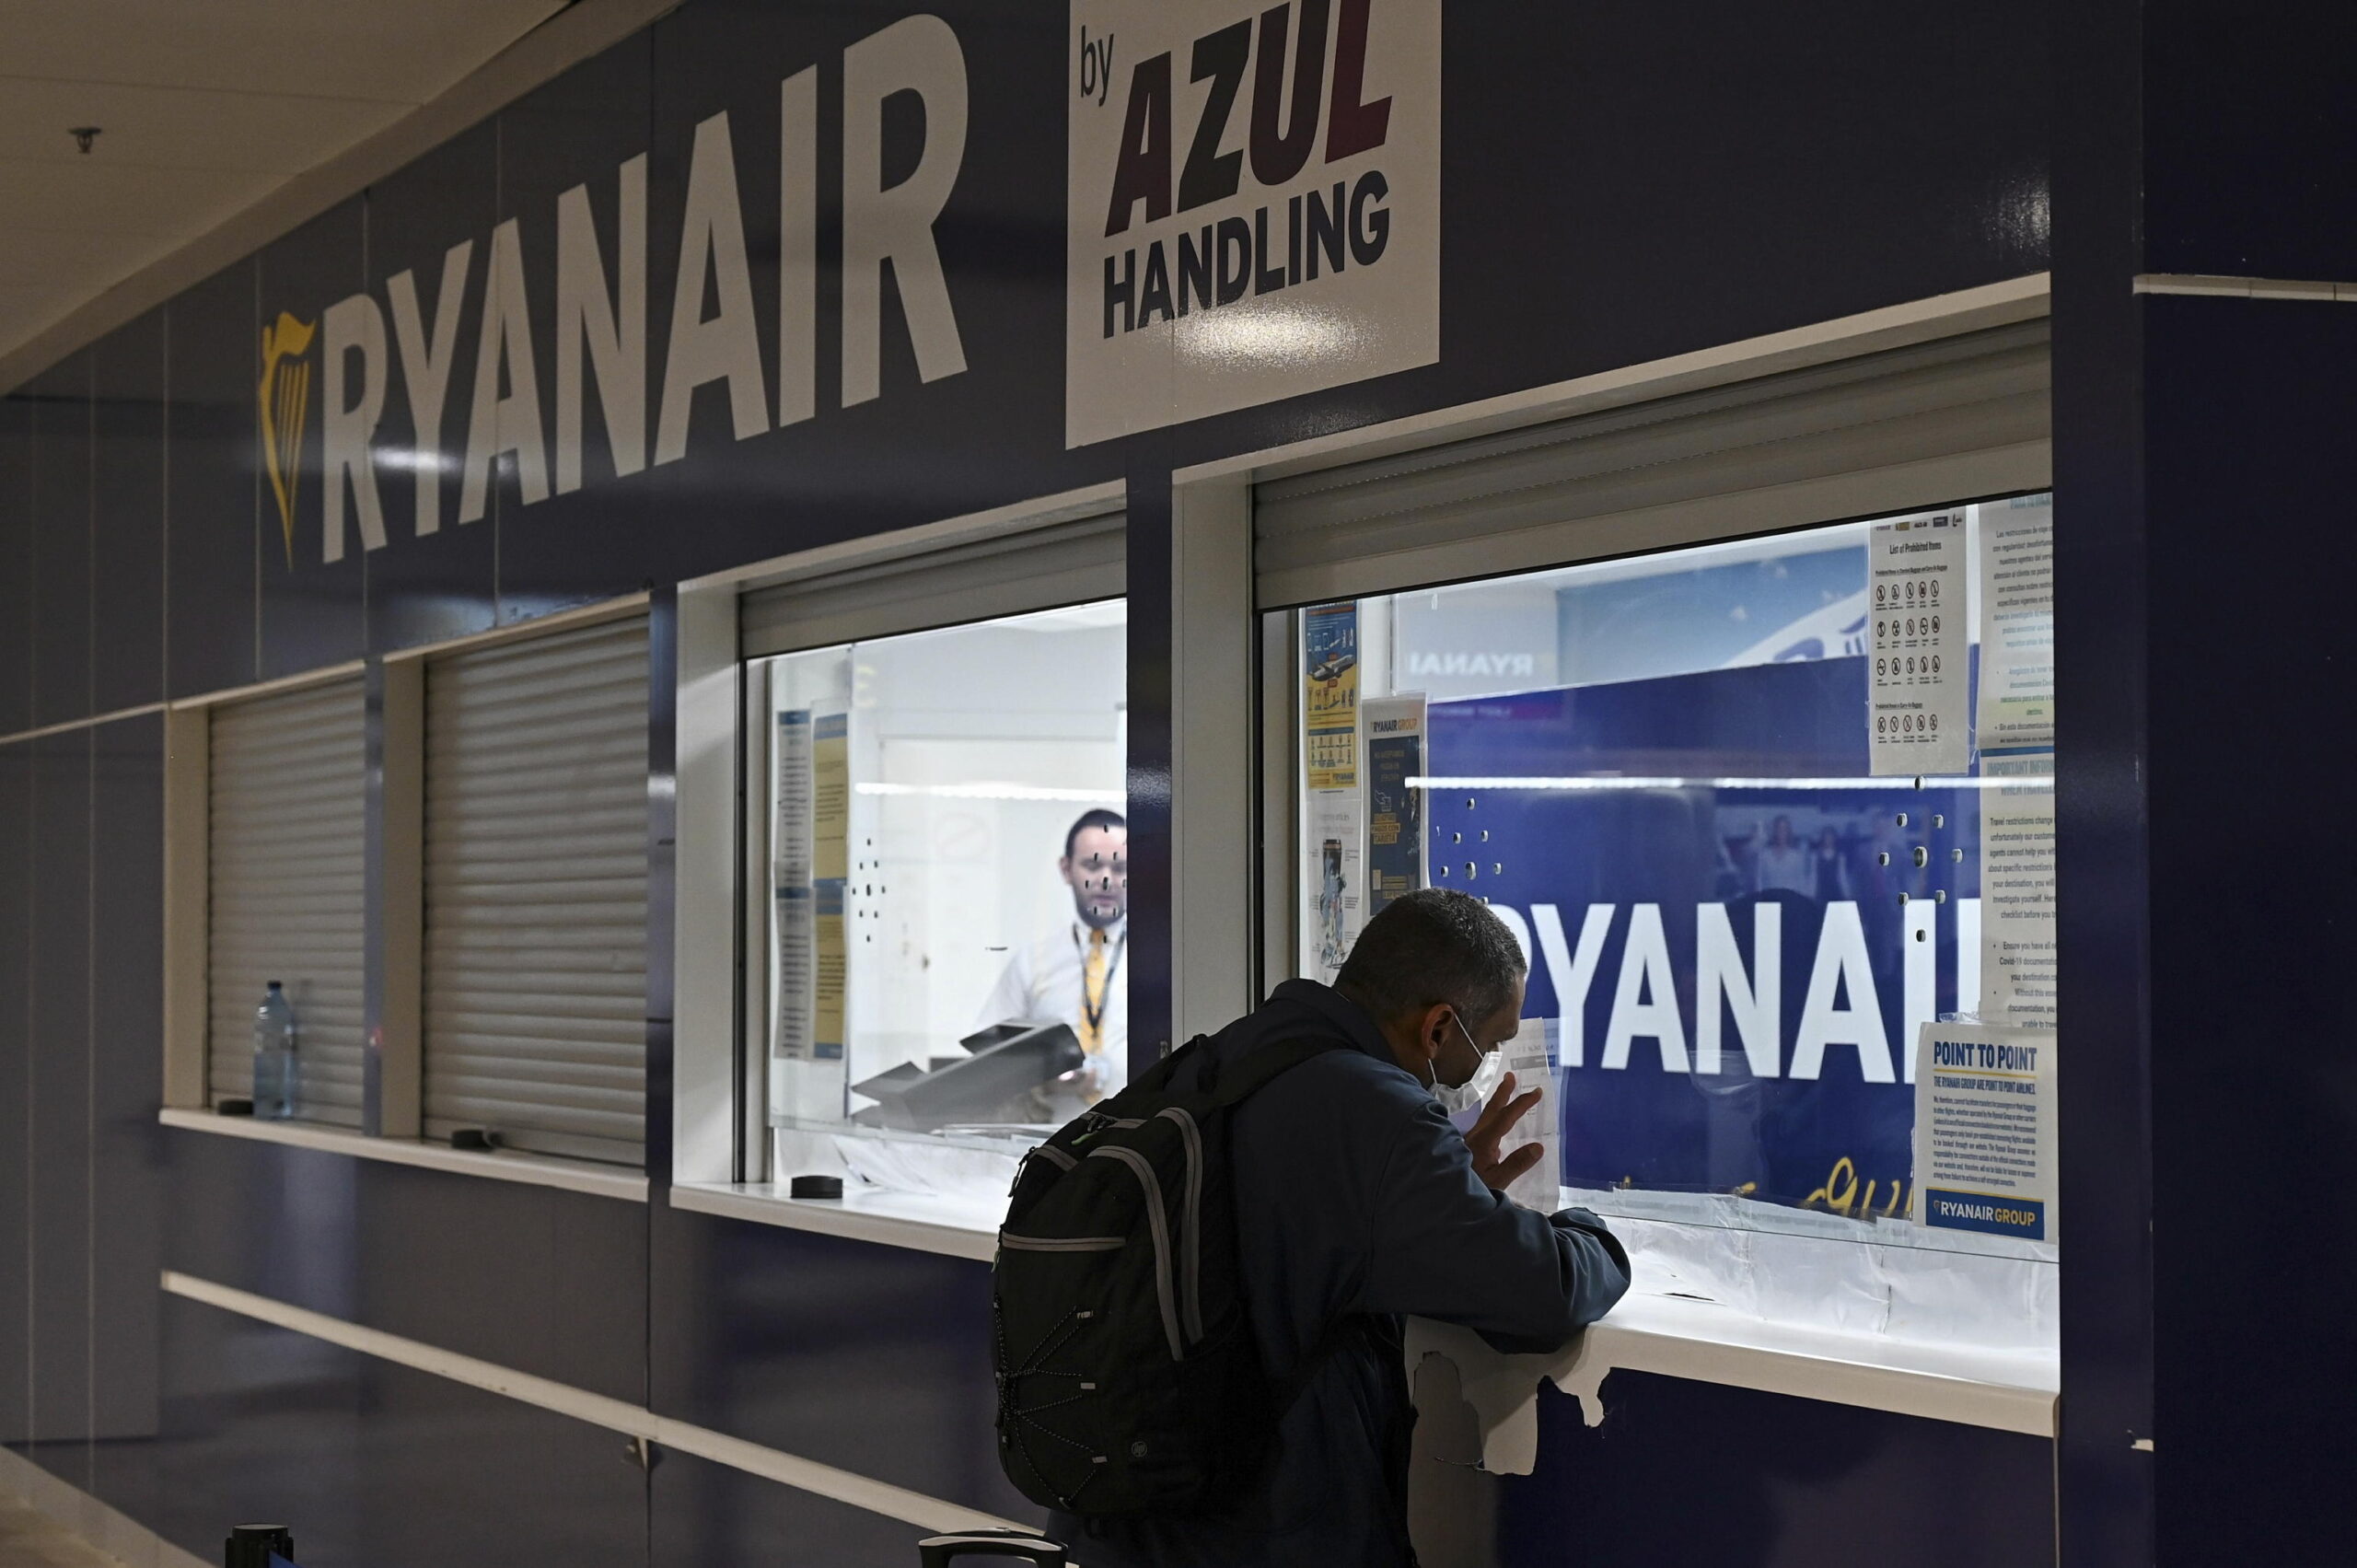 epa10031462 A man at a Ryanair customer service desk during the first day of strike called by Ryanair crew, at Adolfo Suarez Madrid Barajas international airport, in Madrid, Spain, 24 June 2022. Ryanair employees in Spain called for a strike on 24-26 June, 30 June and 01-02 July over dissatisfaction with working conditions and pay. More budget airlines across several European countries are expected to strike throughout July 2022.  EPA/FERNANDO VILLAR